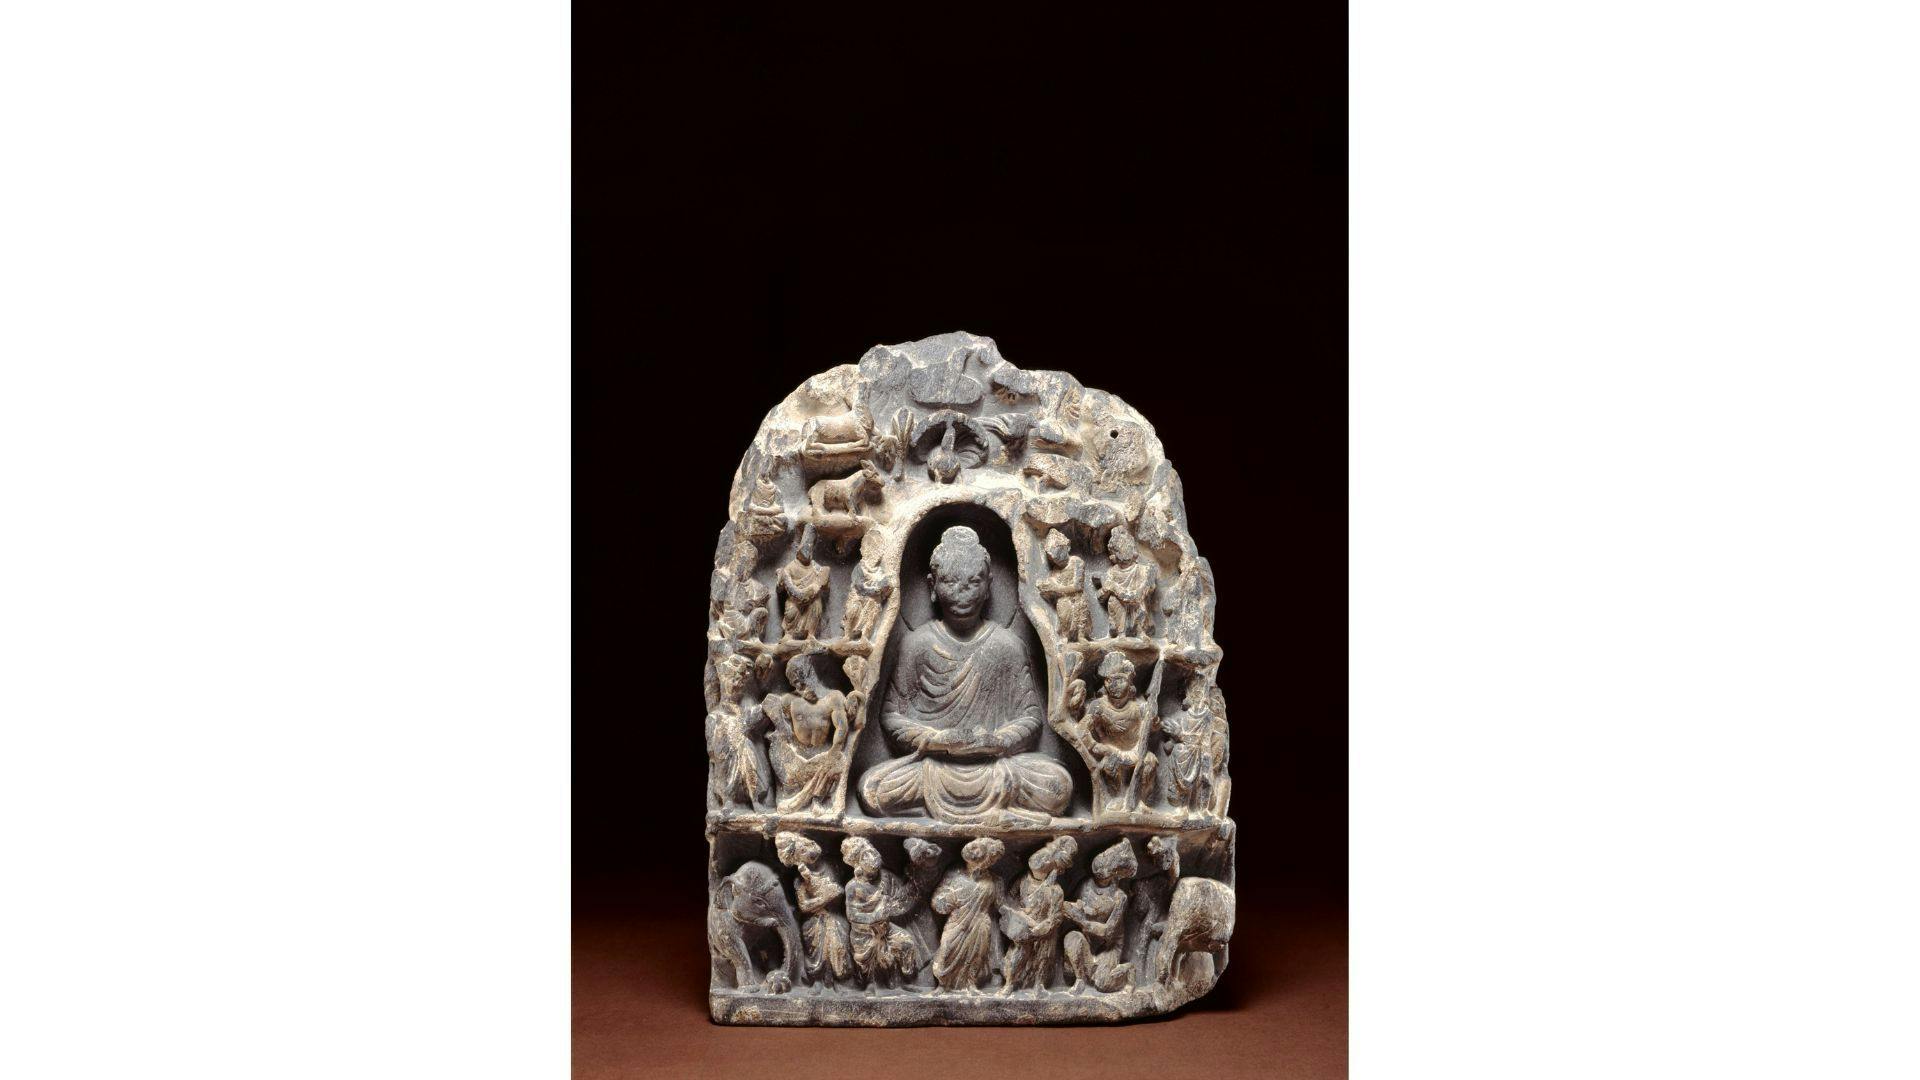 Depiction of the Indasala cave from Gandhara, Pakistan, 1st to 3rd century CE, the British Museum Acc. No. AN30158001. © Trustees of the British Museum, London.